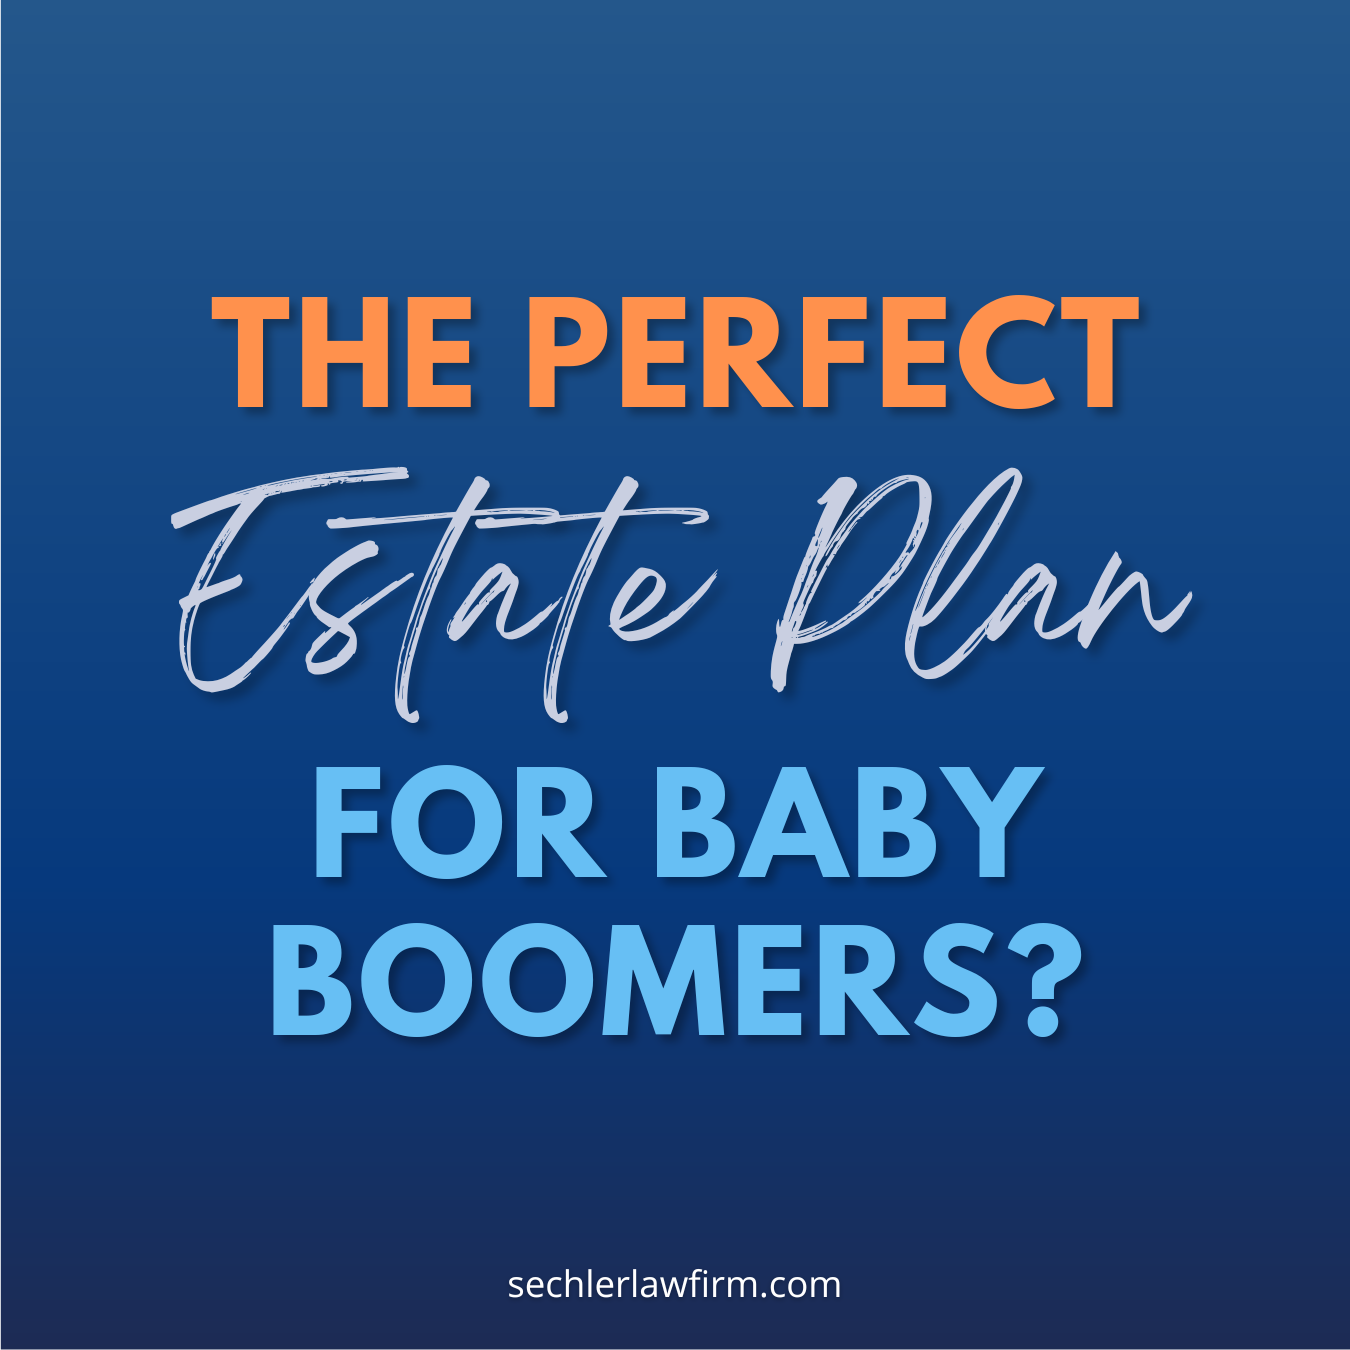 The Perfect Estate Plan for Baby Boomers?